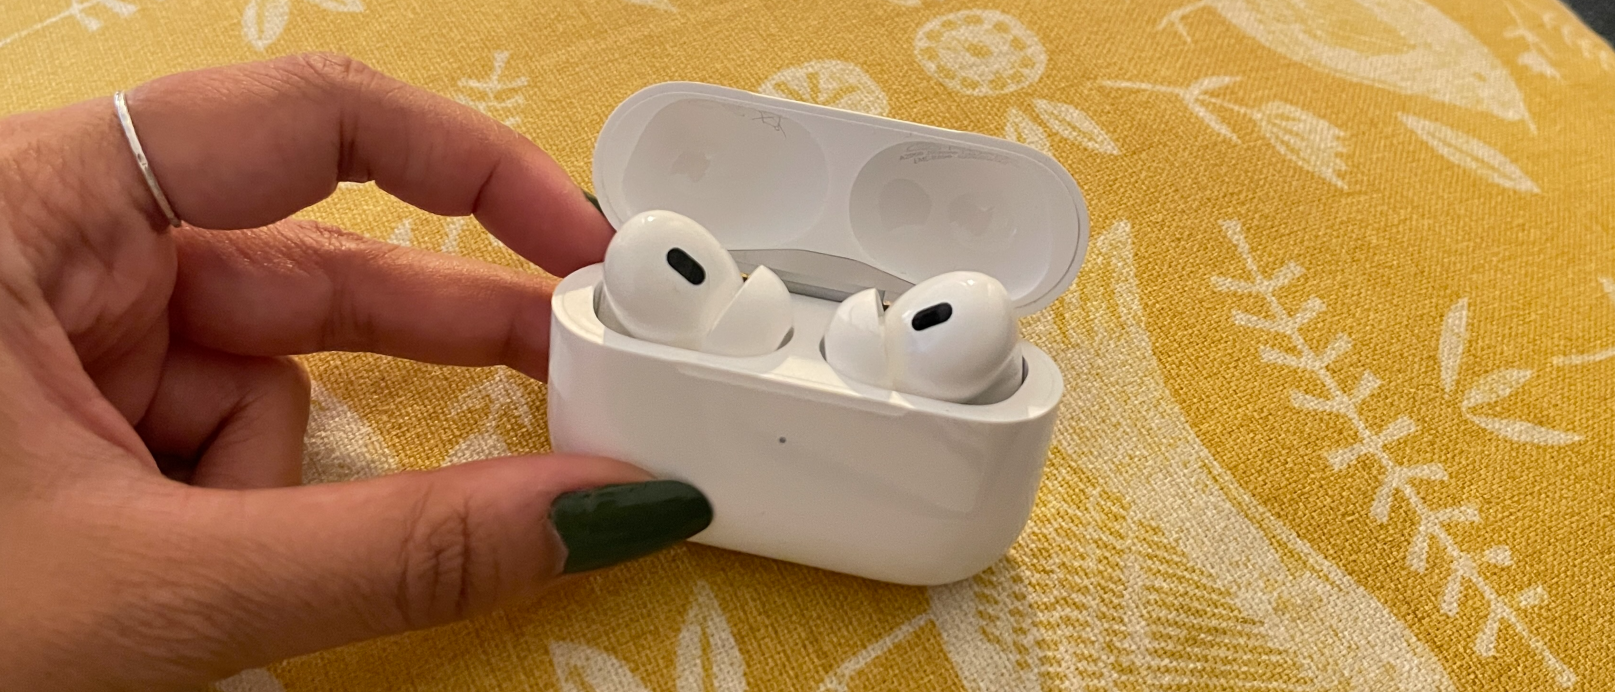 Use Adaptive Audio with your AirPods Pro (2nd generation) - Apple Support